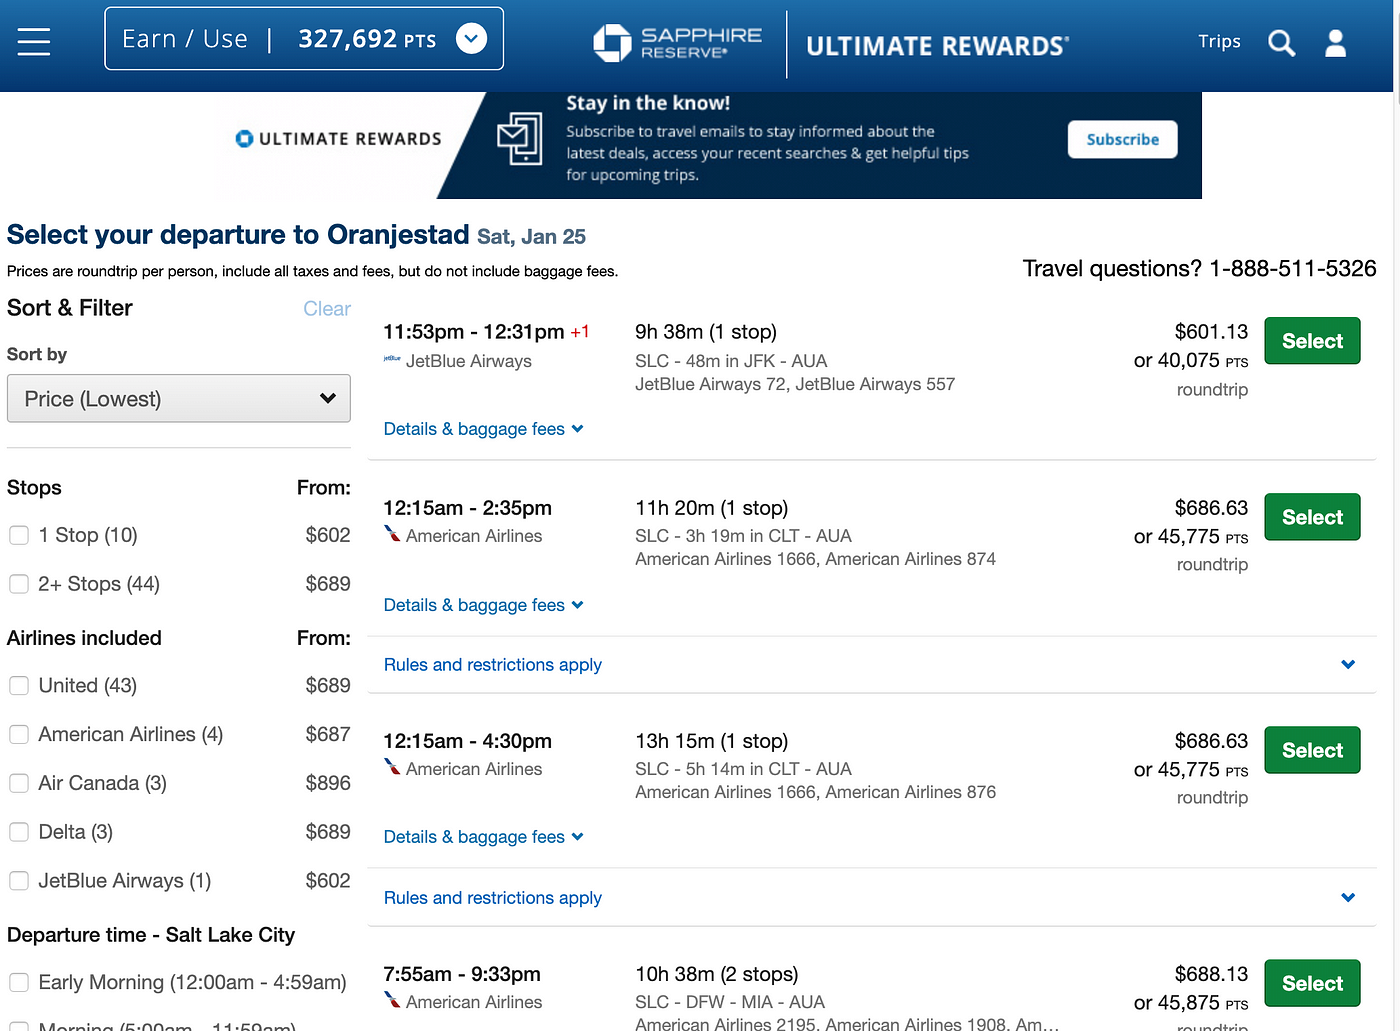 The Complete Guide to Chase Ultimate Rewards® – Top Travel on Points